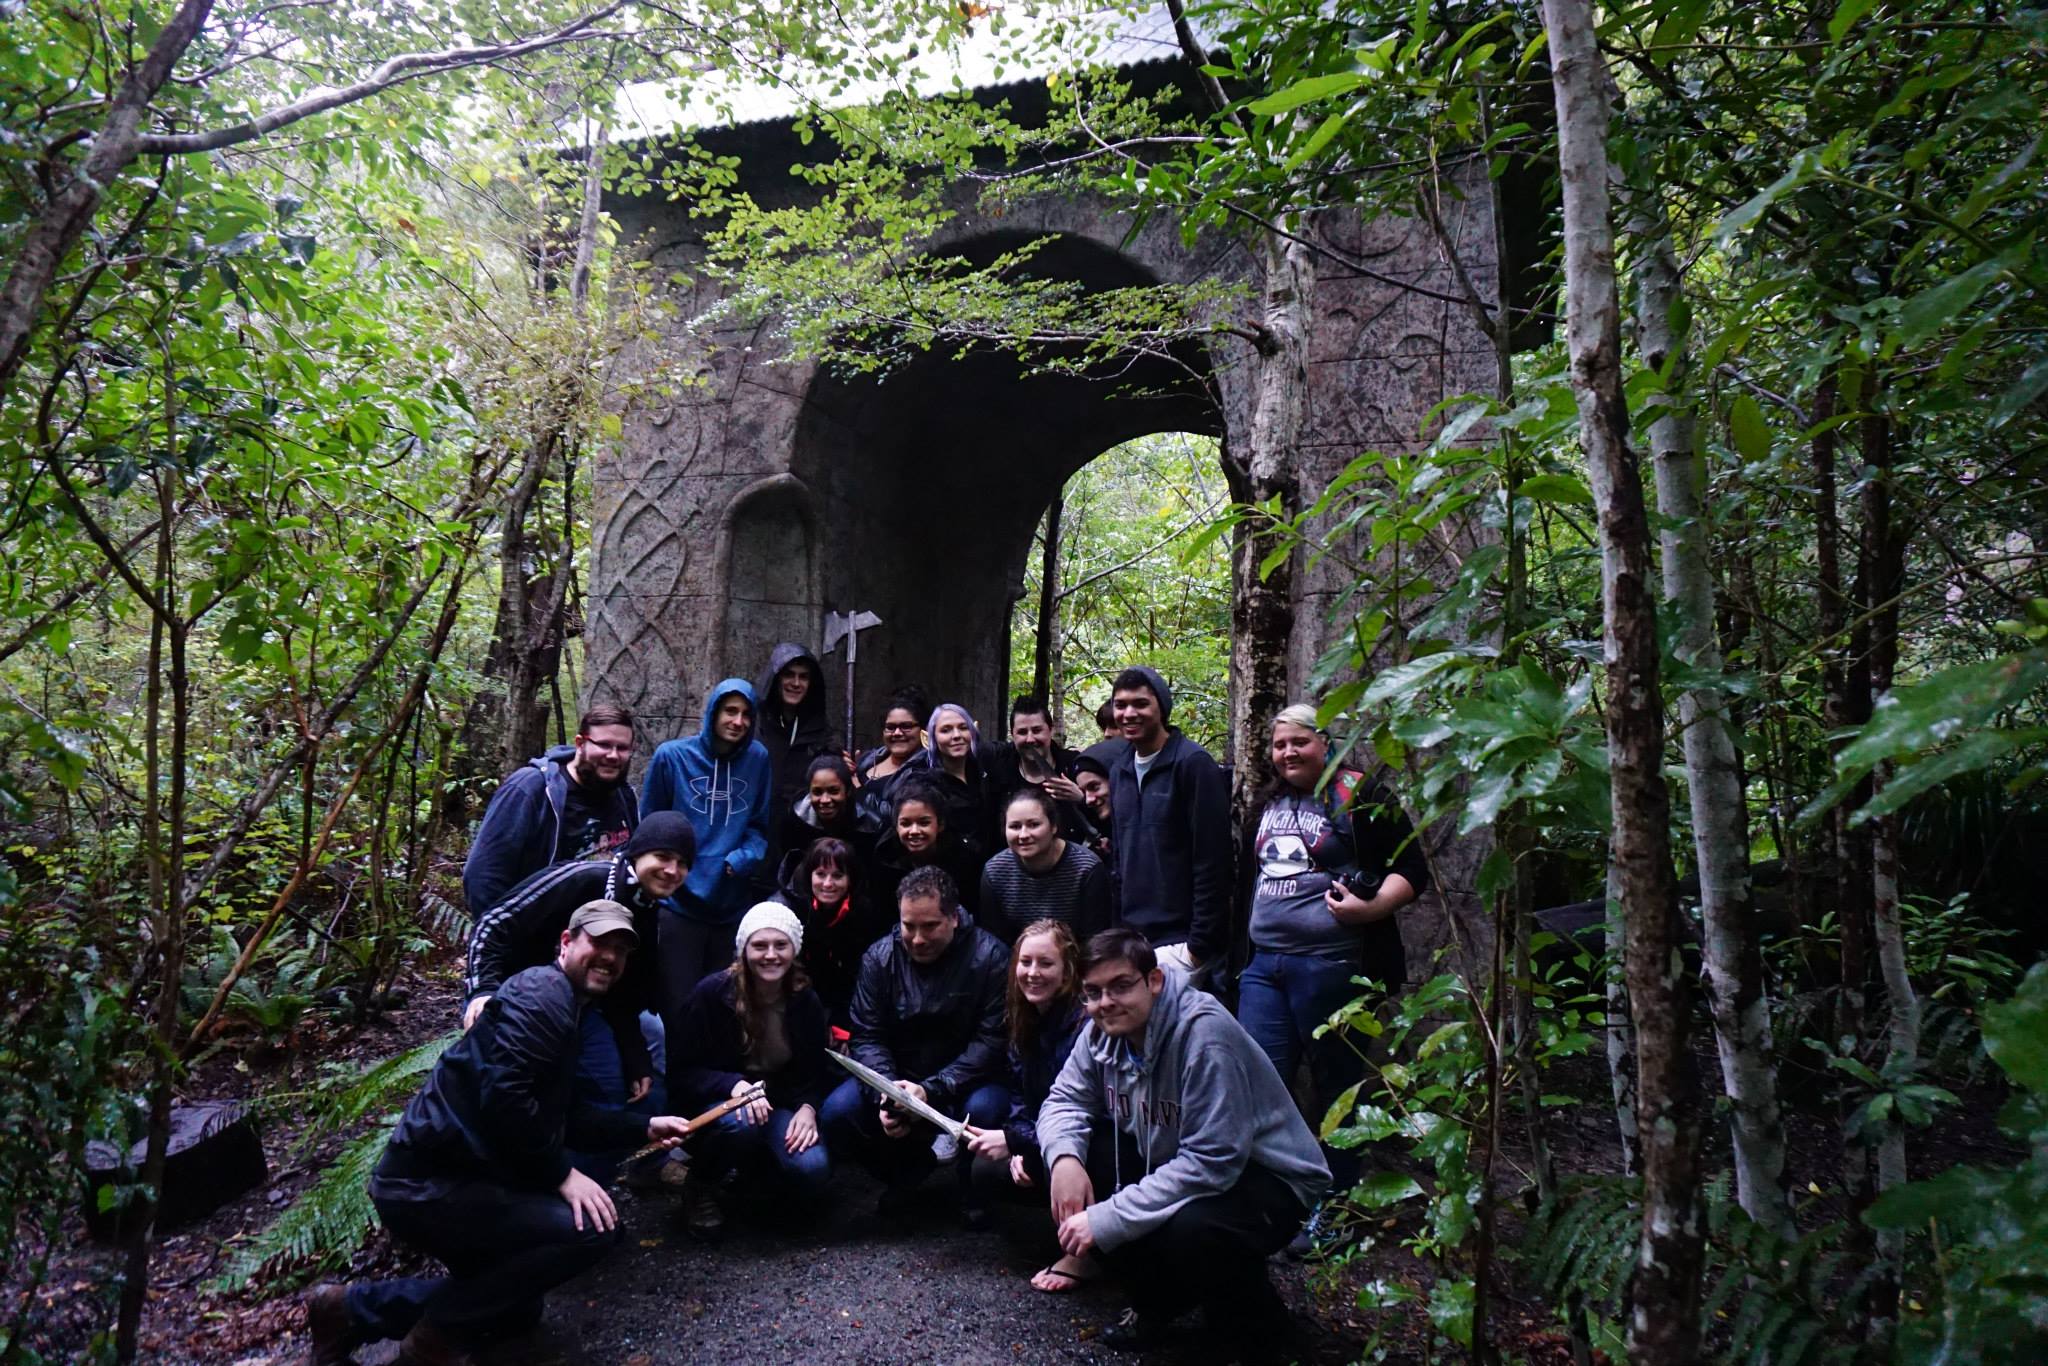 A group stands in front of a stone arch in a forest.